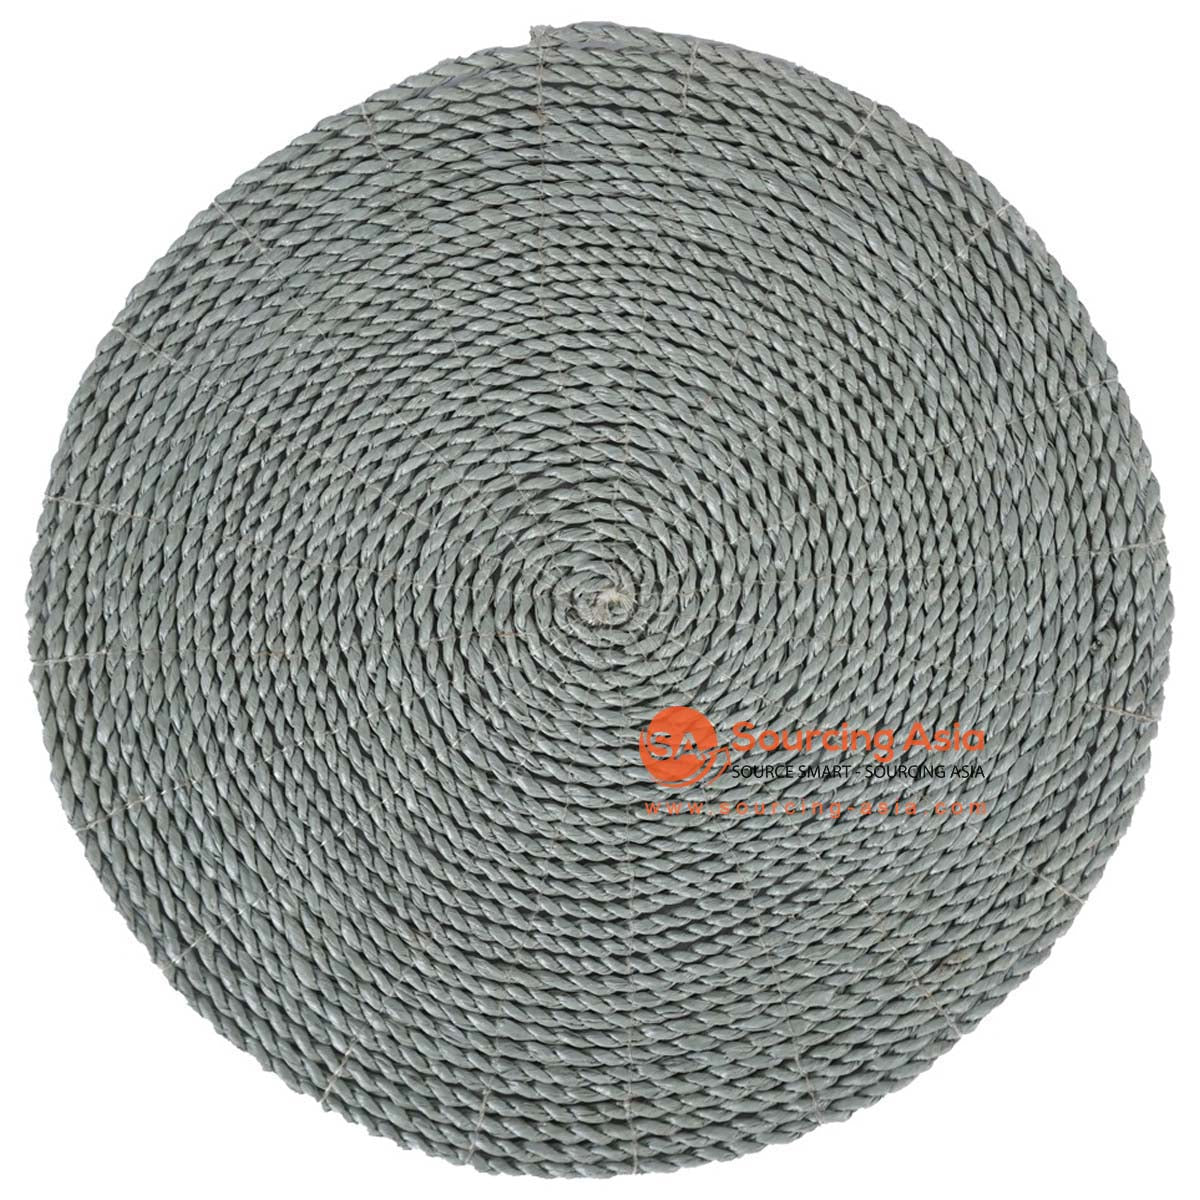 HBSC570 GREY PLASTIC ROUND PLACEMAT